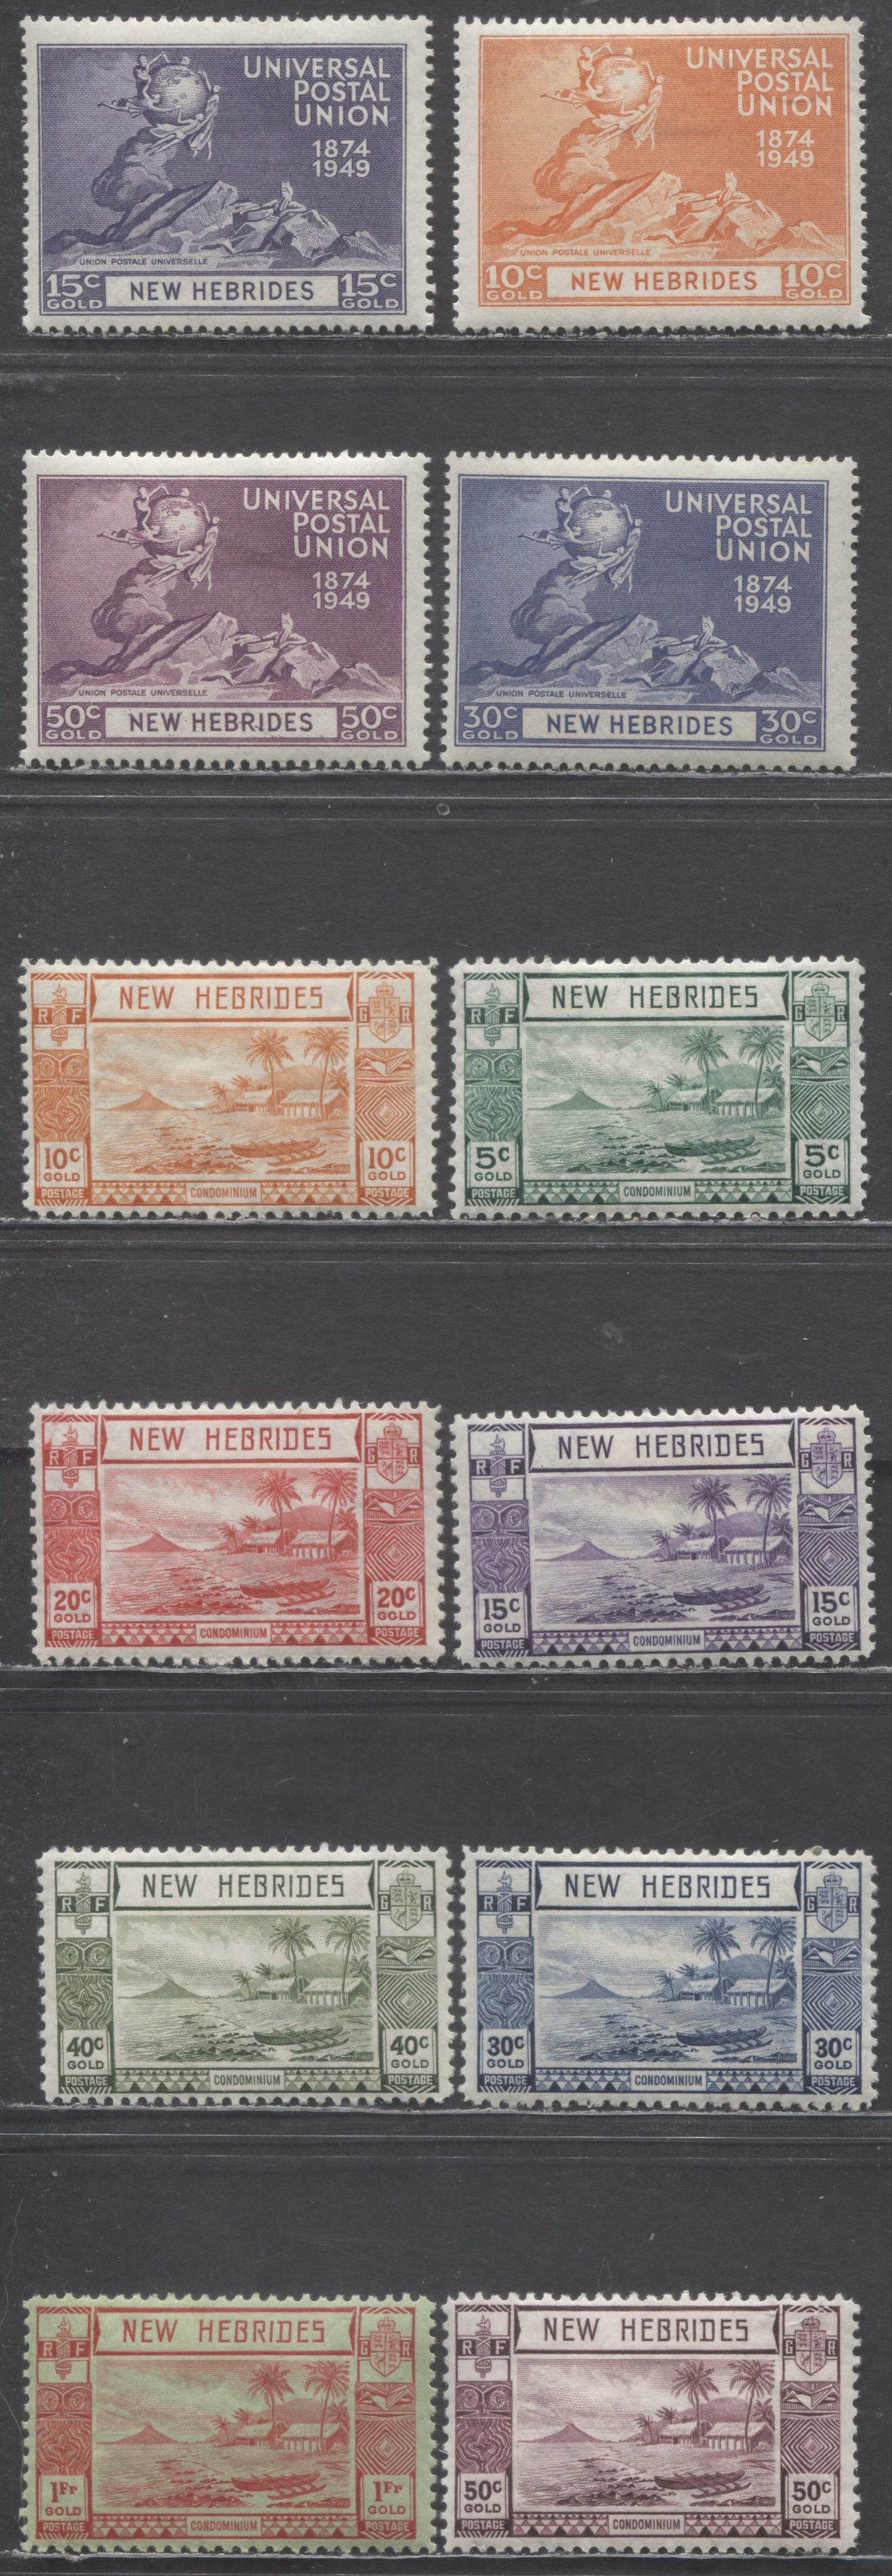 Lot 98 New Hebrides SC#50/65 1938-1949 Beach Scene Definitives & UPU Issues, 12 VFOG Singles, Click on Listing to See ALL Pictures, 2022 Scott Classic Cat. $26.1